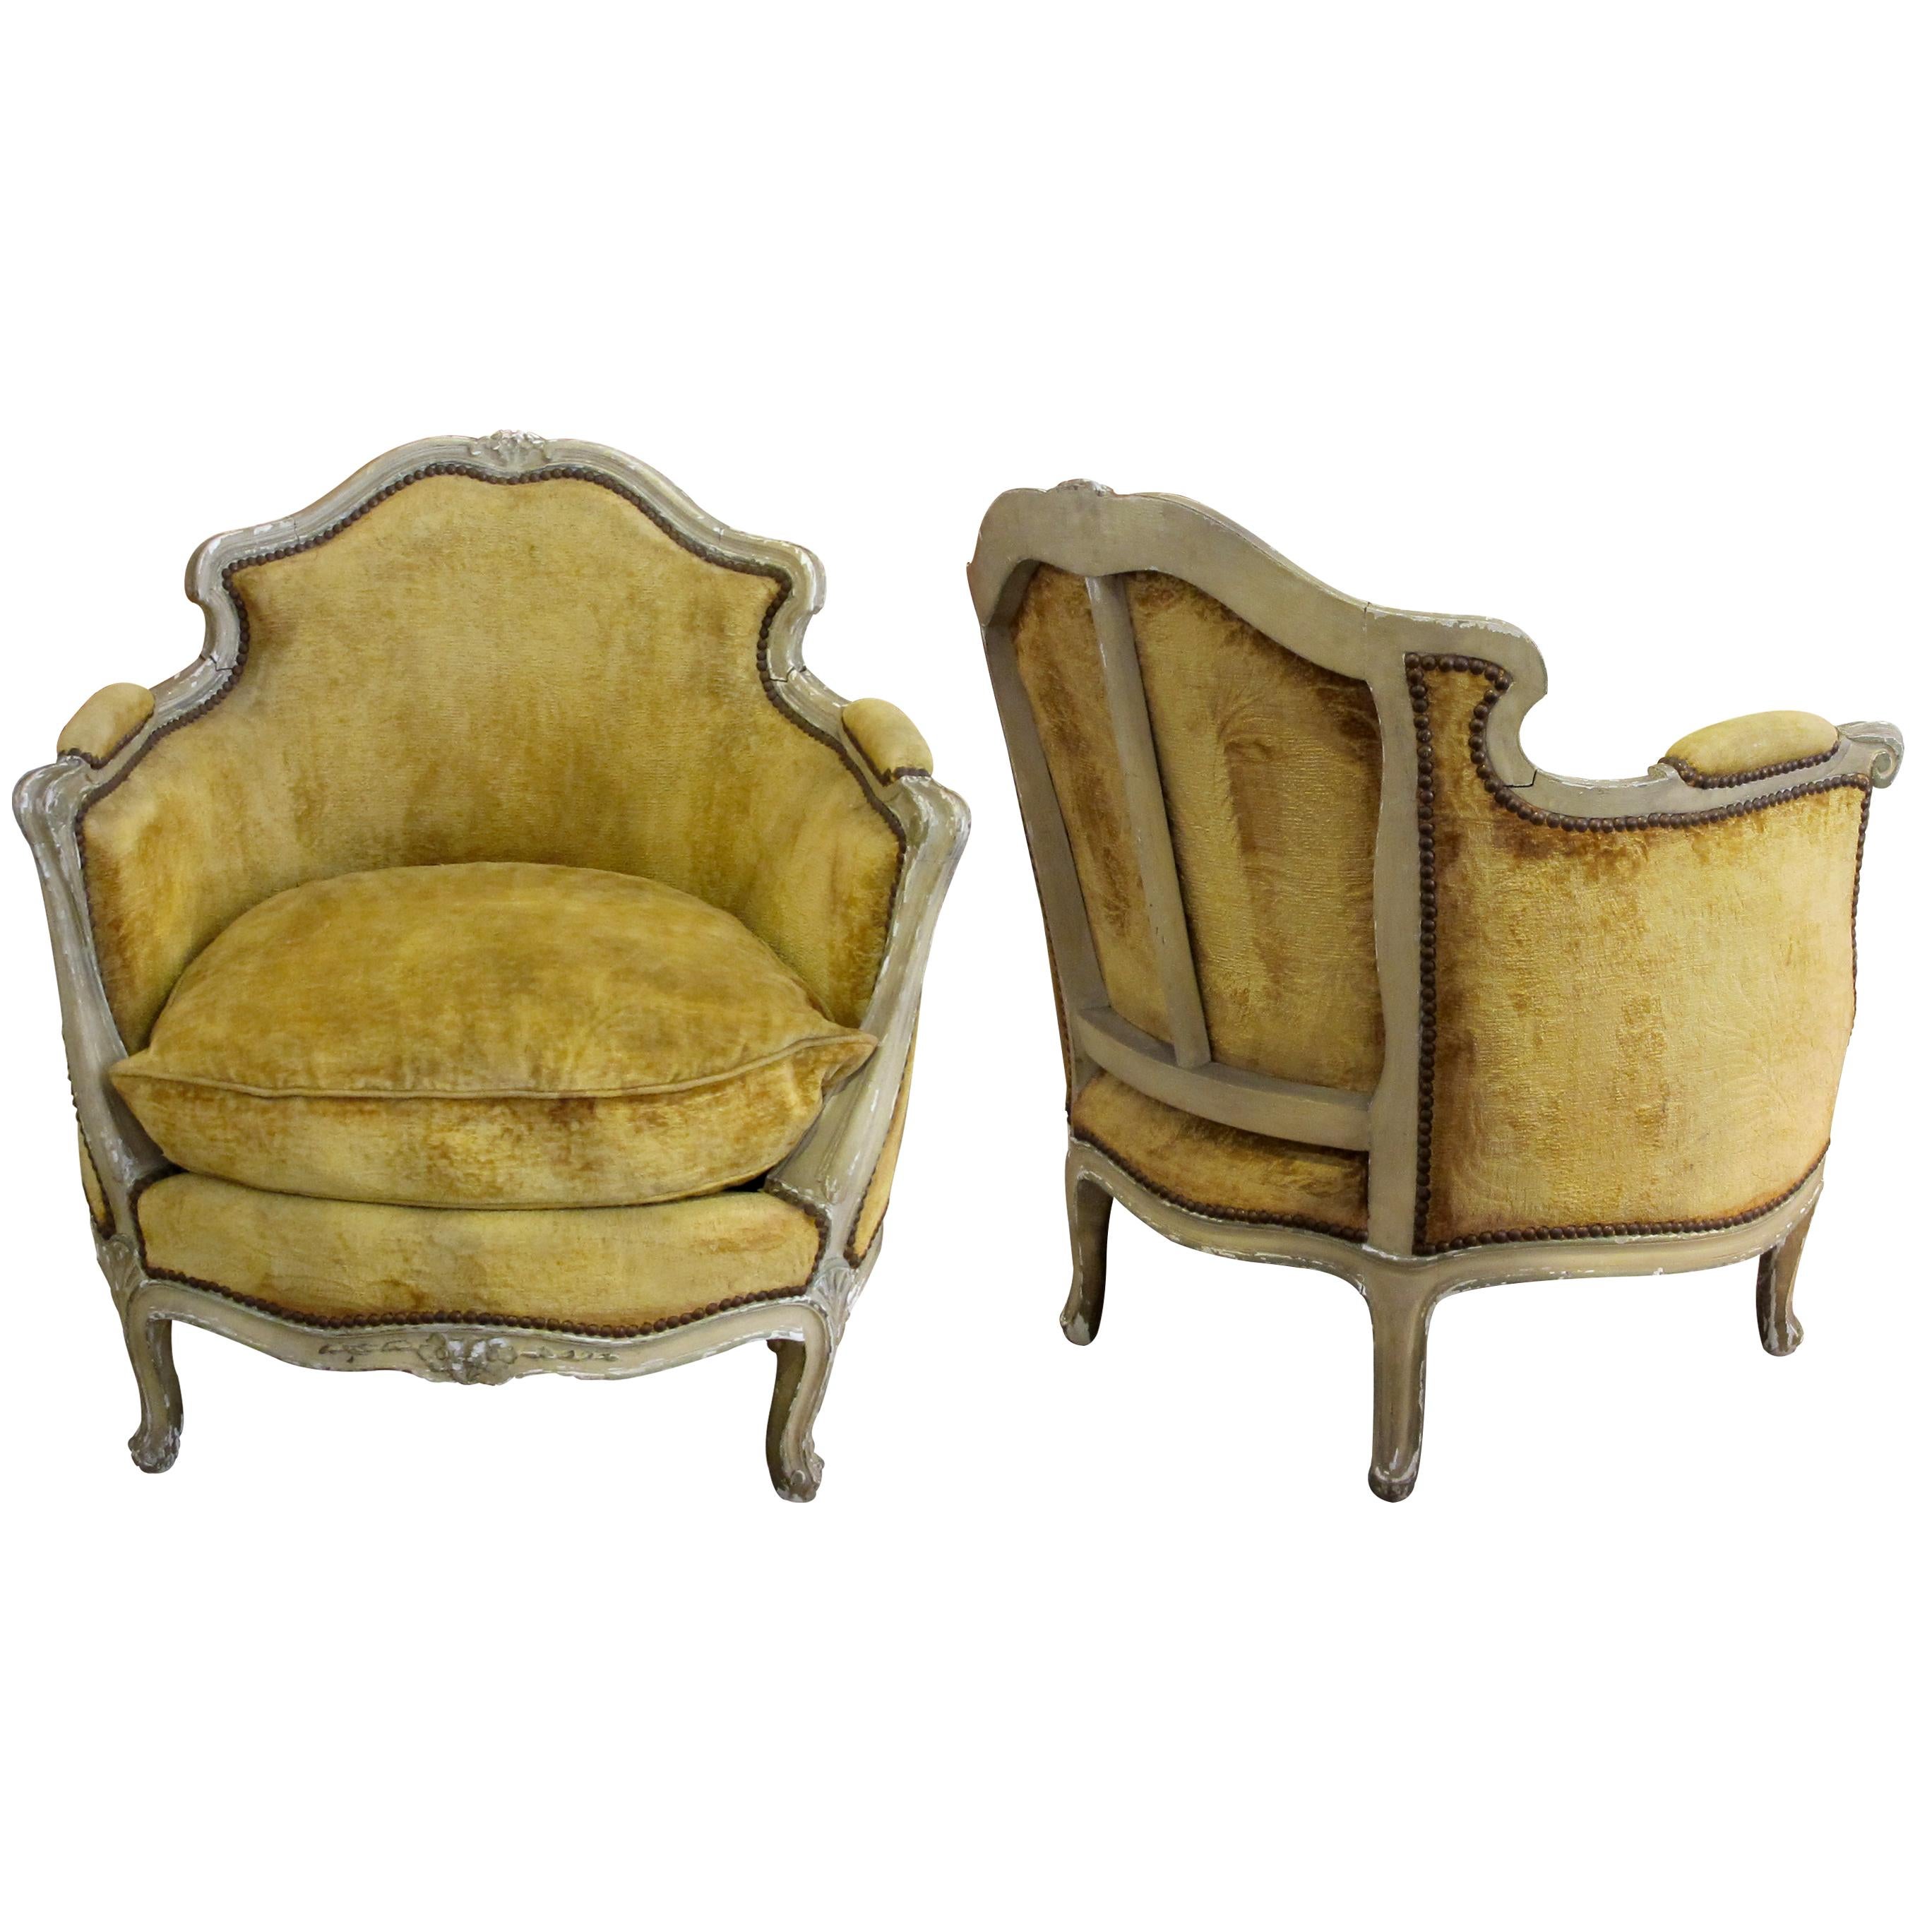 A very elegant pair of 1910/1920s French Louis XV style small bergères armchairs with painted frames. The armchairs are in great condition, they have acquired a beautiful patina commensurate with their age and have also retained their original